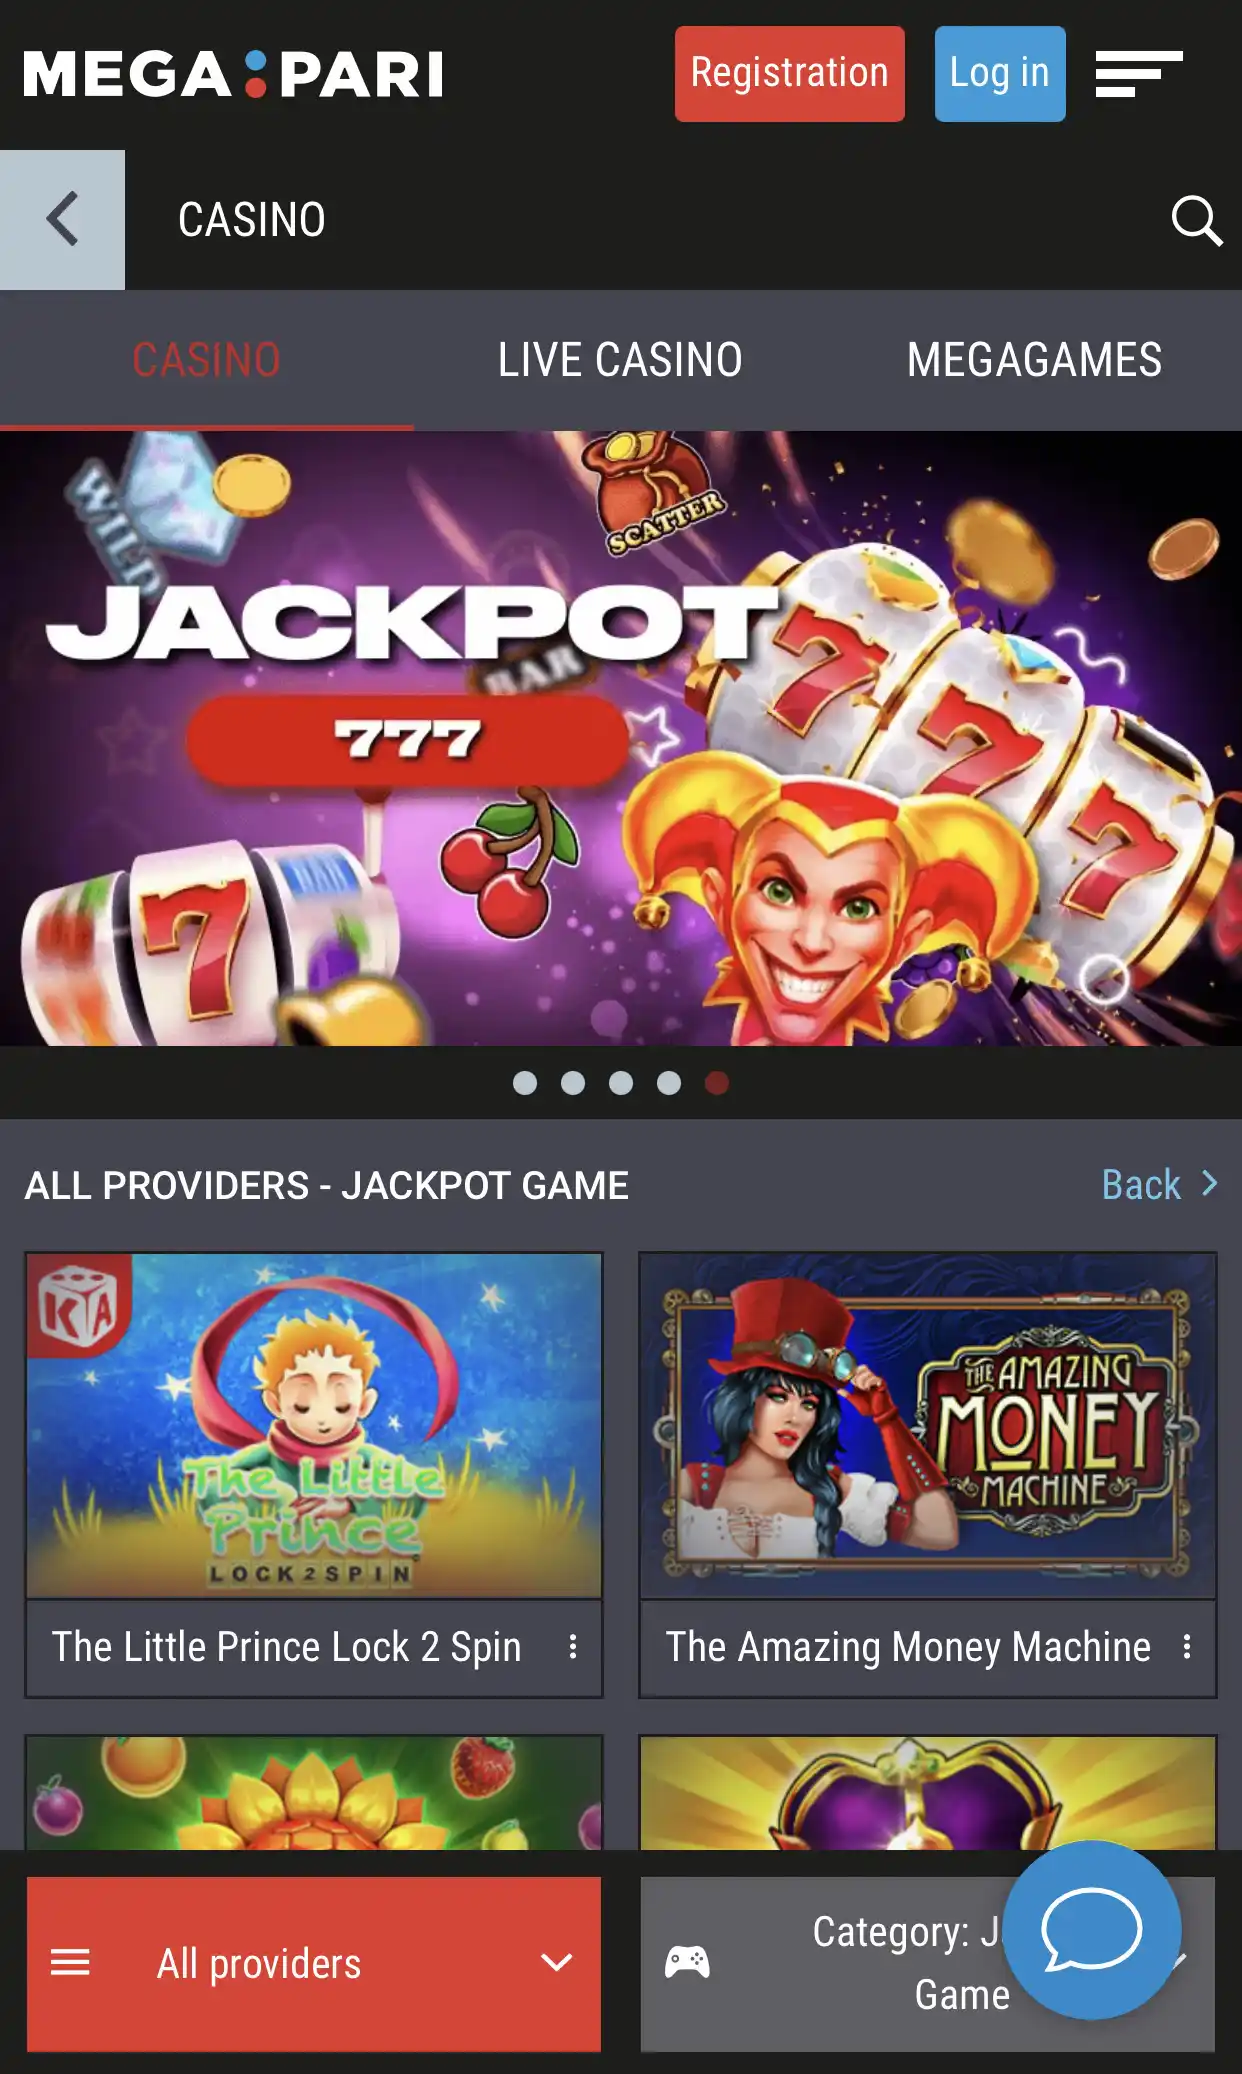 Try your luck at Megapari Casino and win the jackpot.